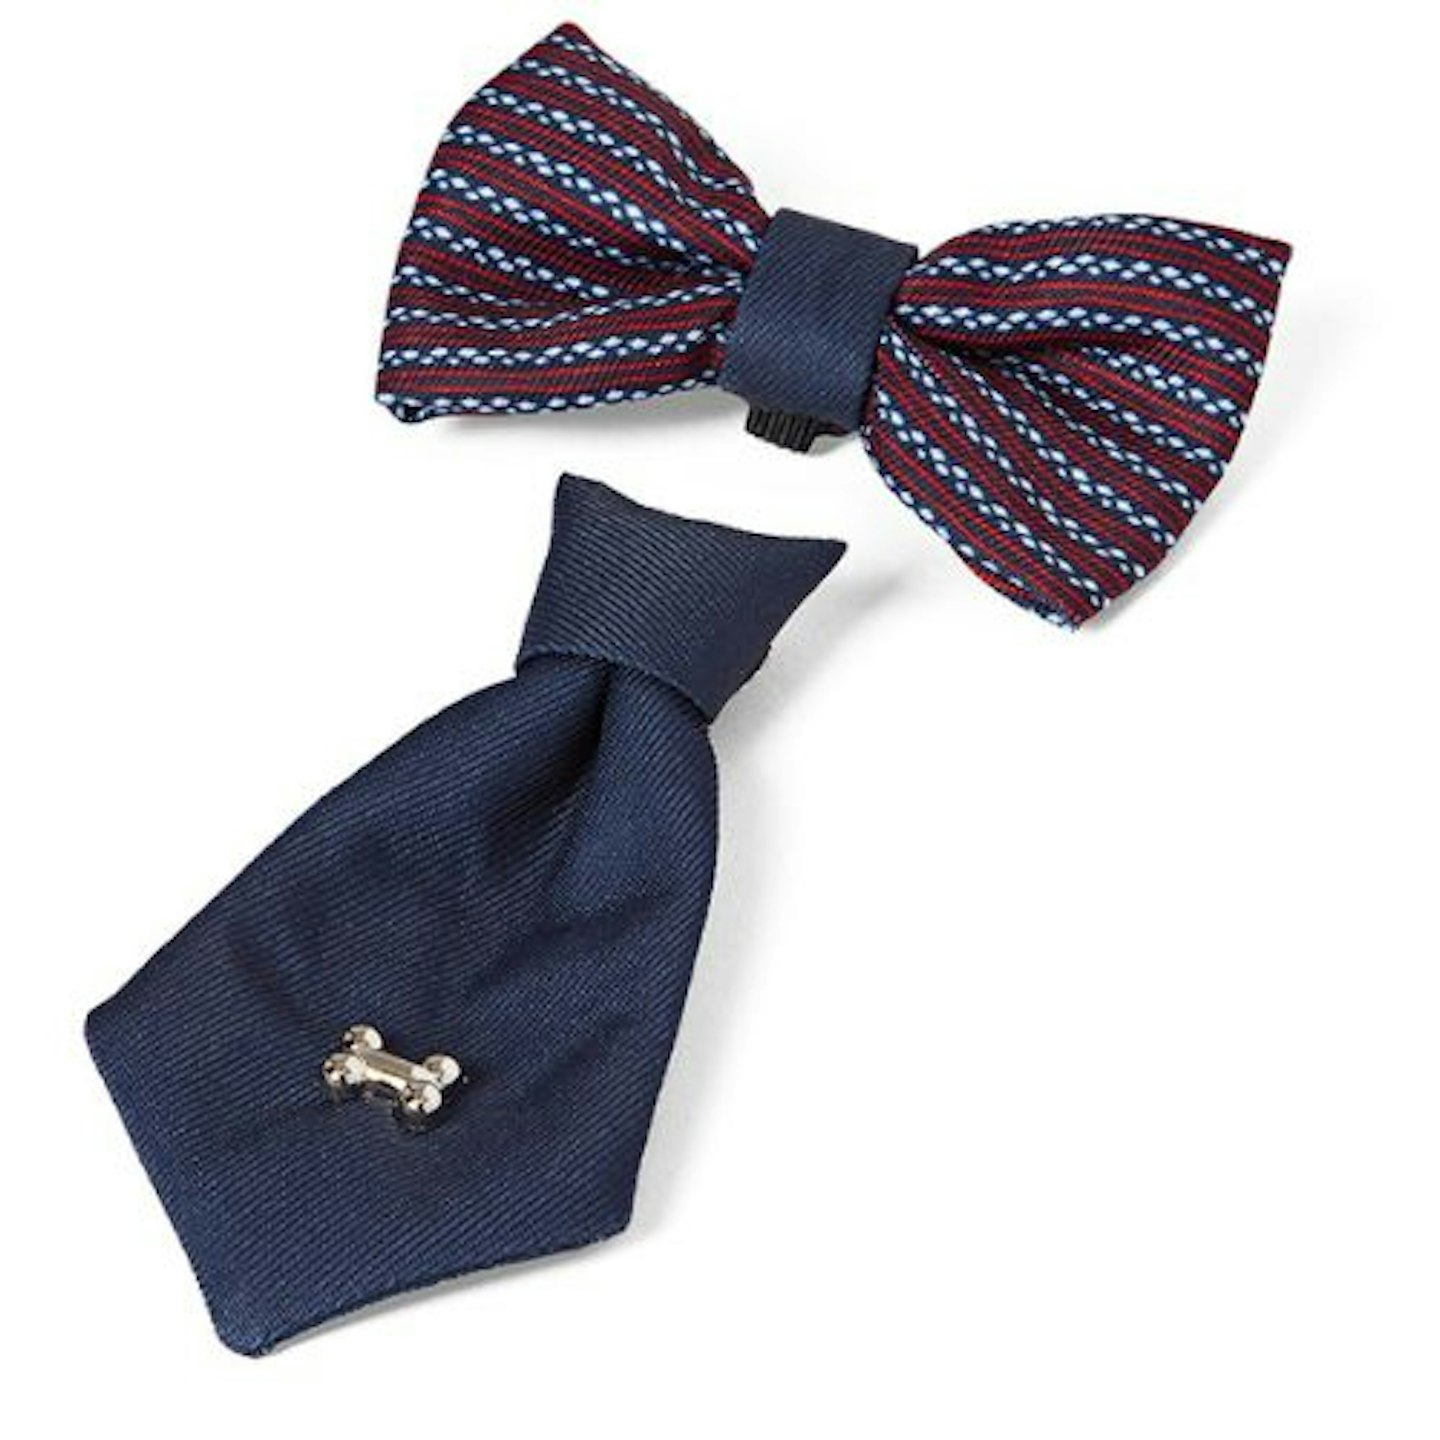 Pets at Home Dog Bow-Tie and Tie Set